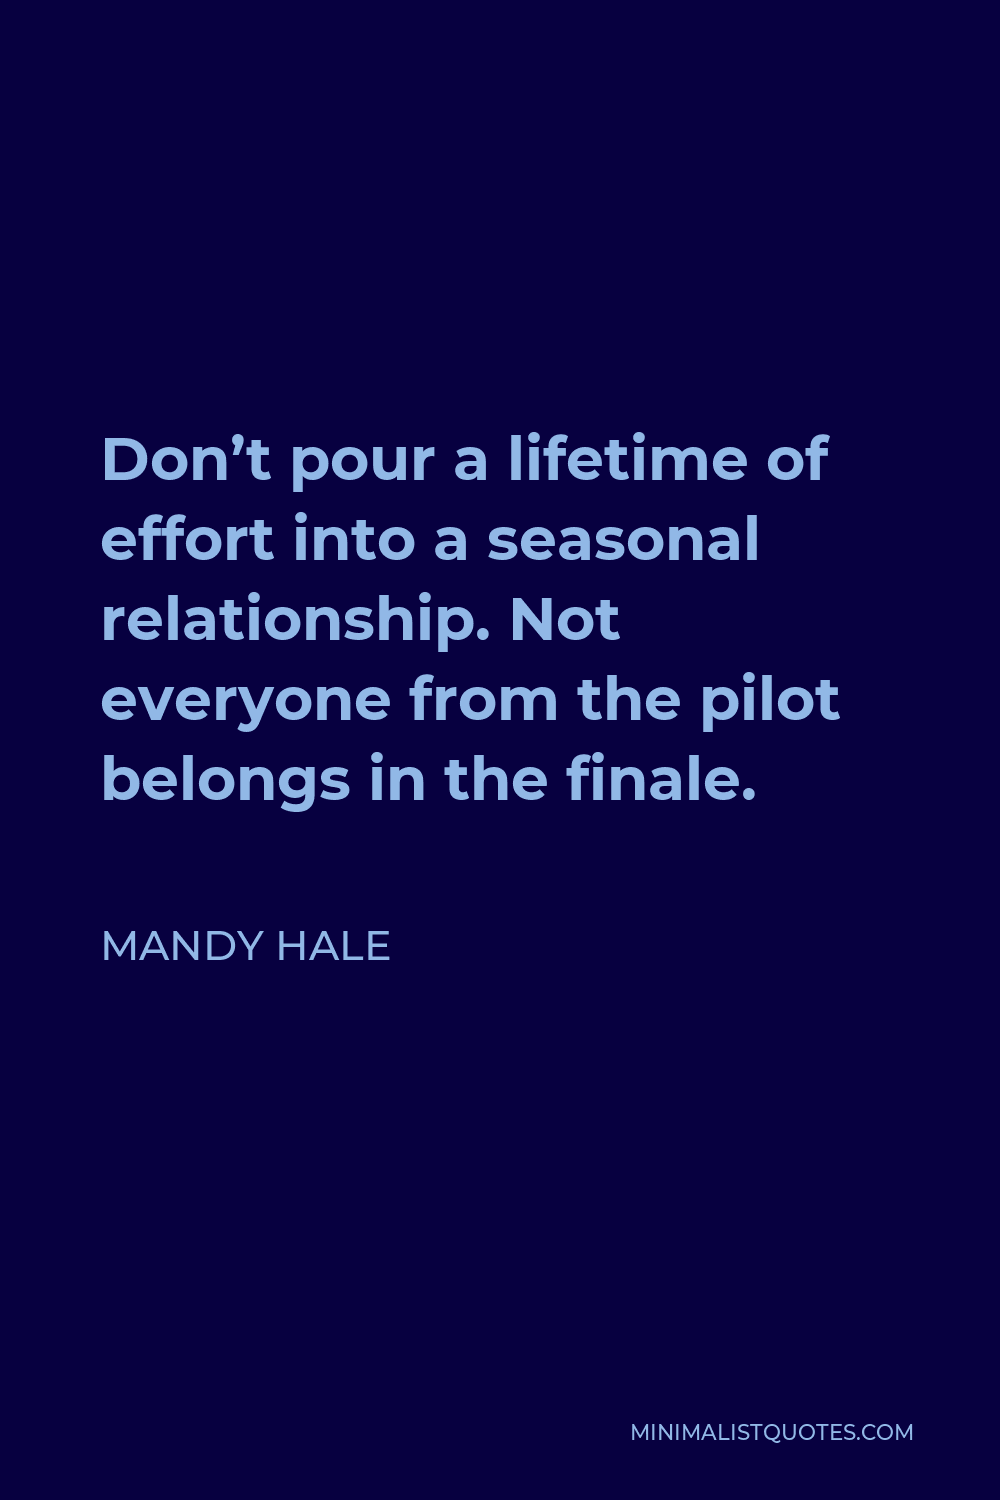 Mandy Hale Quote - Don’t pour a lifetime of effort into a seasonal relationship. Not everyone from the pilot belongs in the finale.